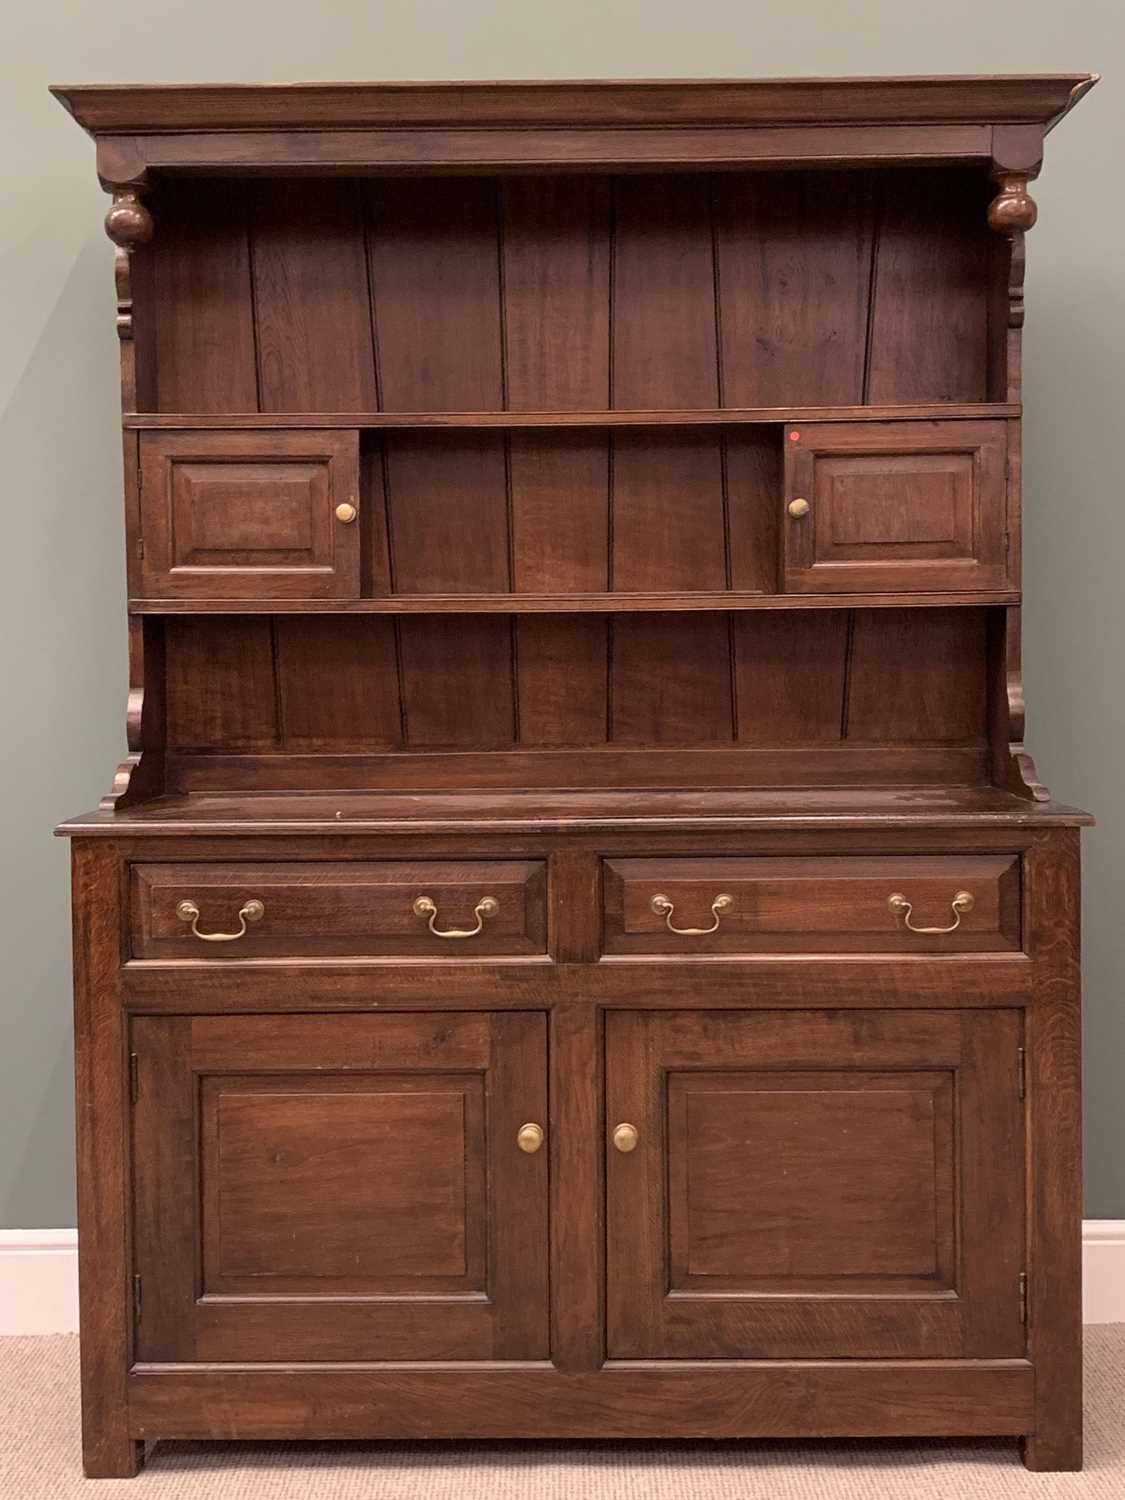 OAK REPRODUCTION DRESSER, a fine example, the base having two drawers over two cupboard doors, the